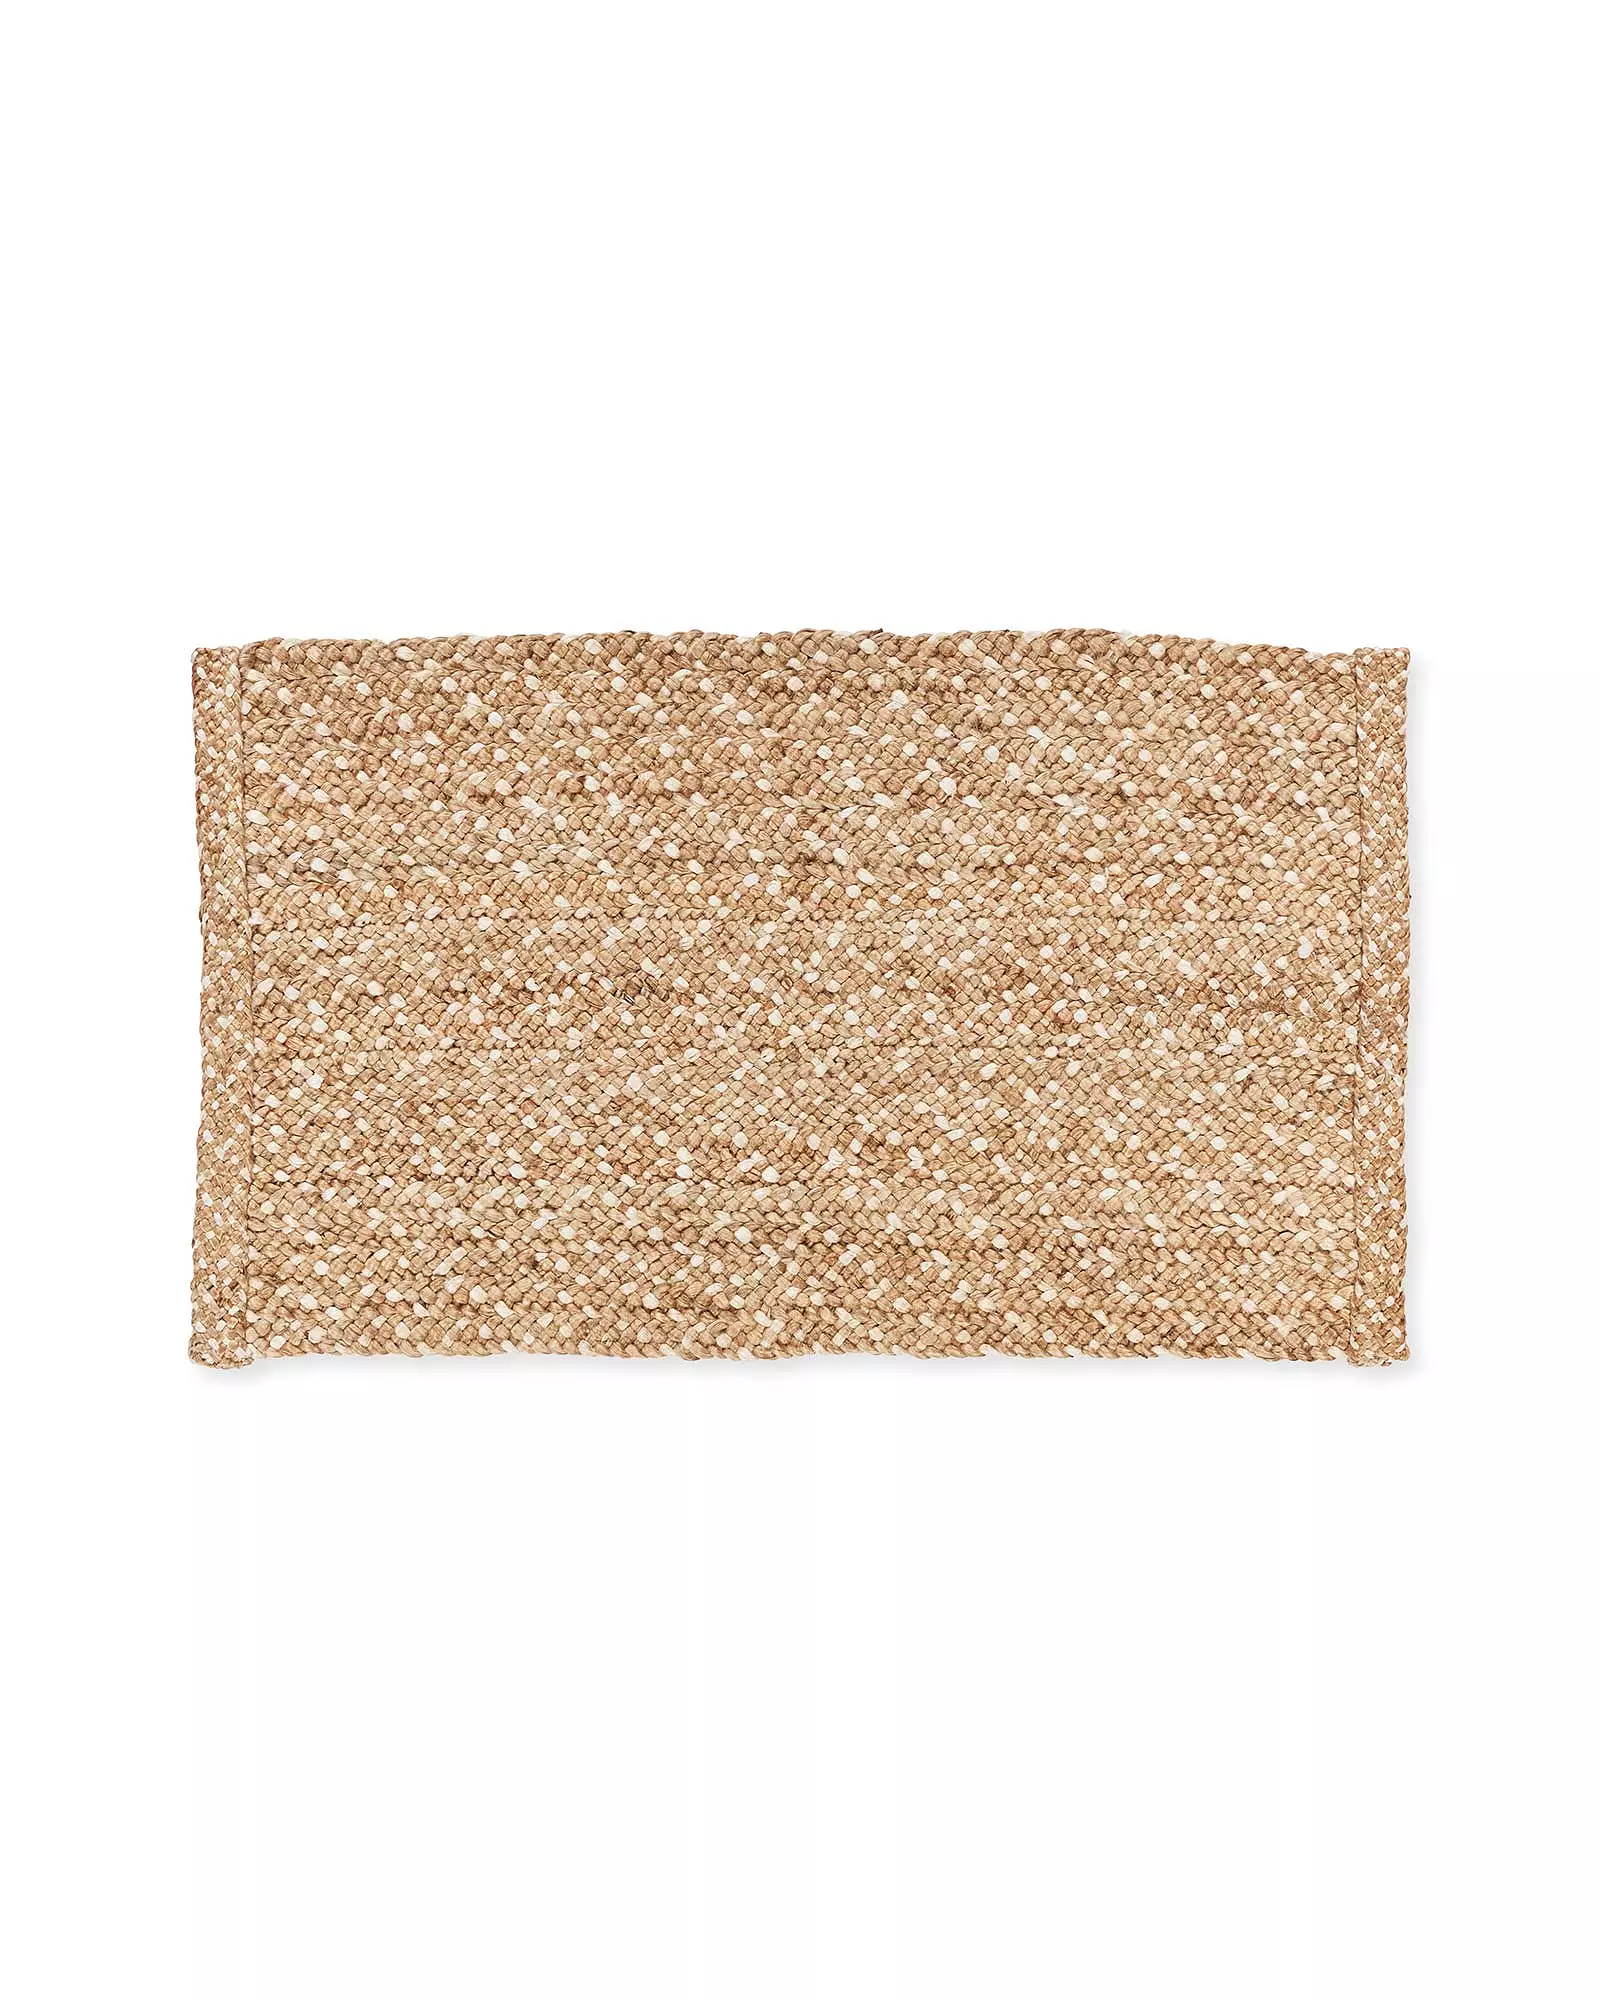 A small tan jute area rug from Serena & Lily